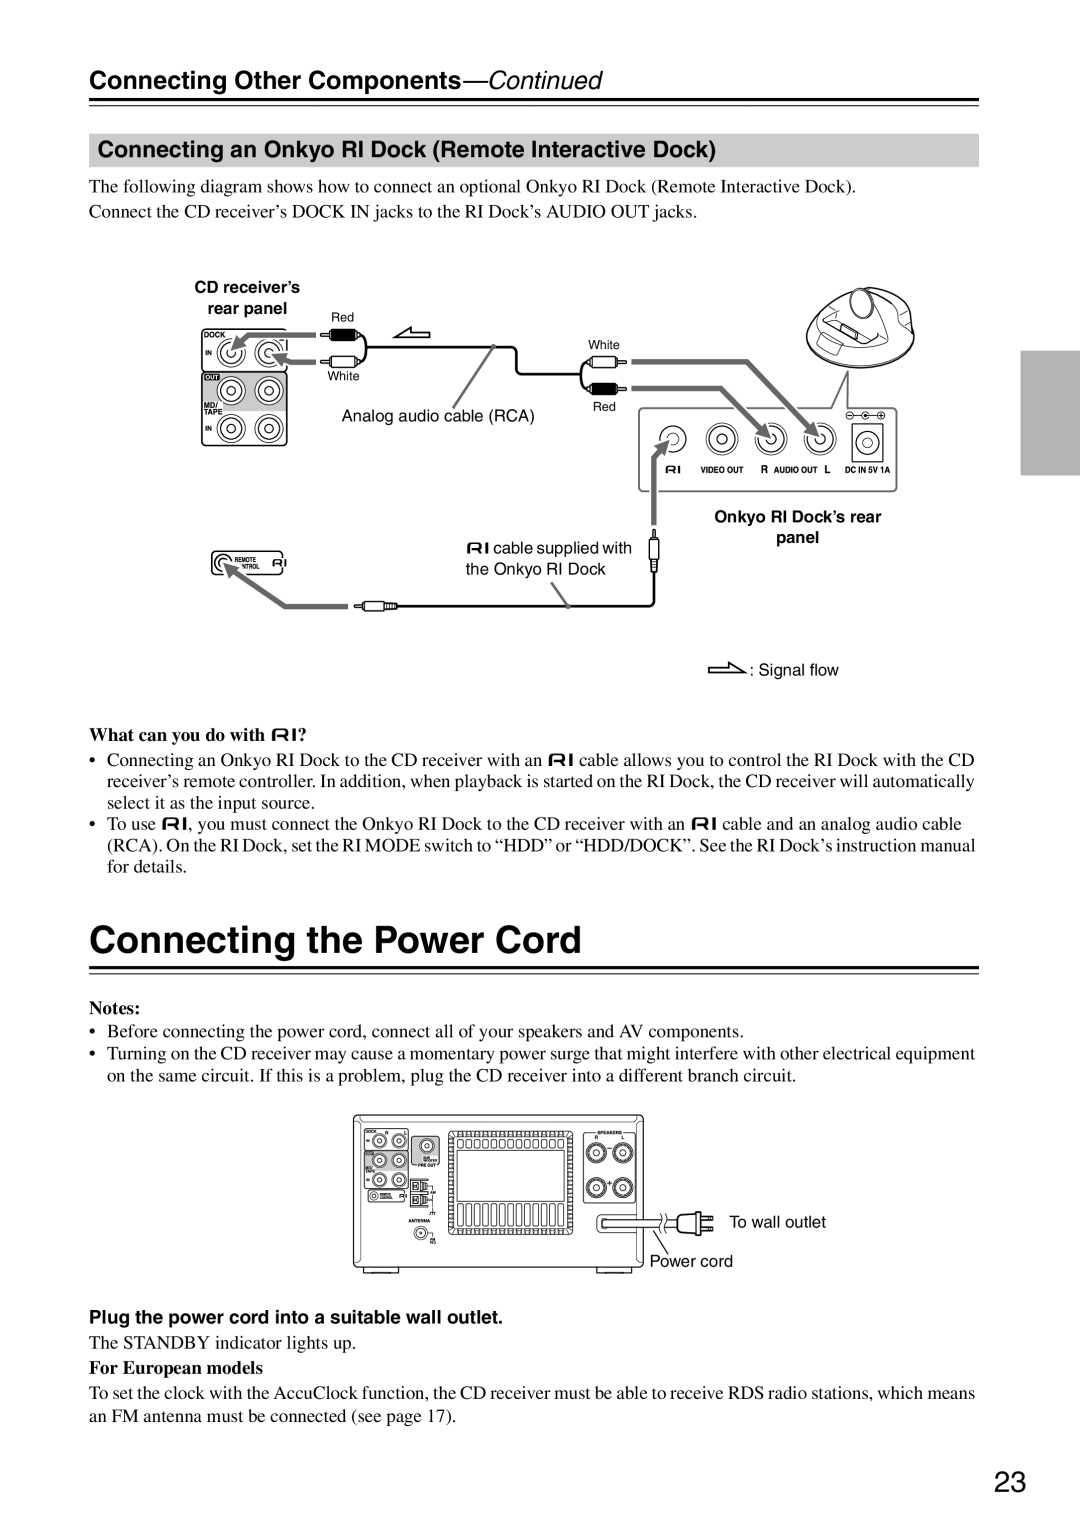 Onkyo CR-525, CR-325 Connecting the Power Cord, Connecting Other Components-Continued, What can you do with u? 